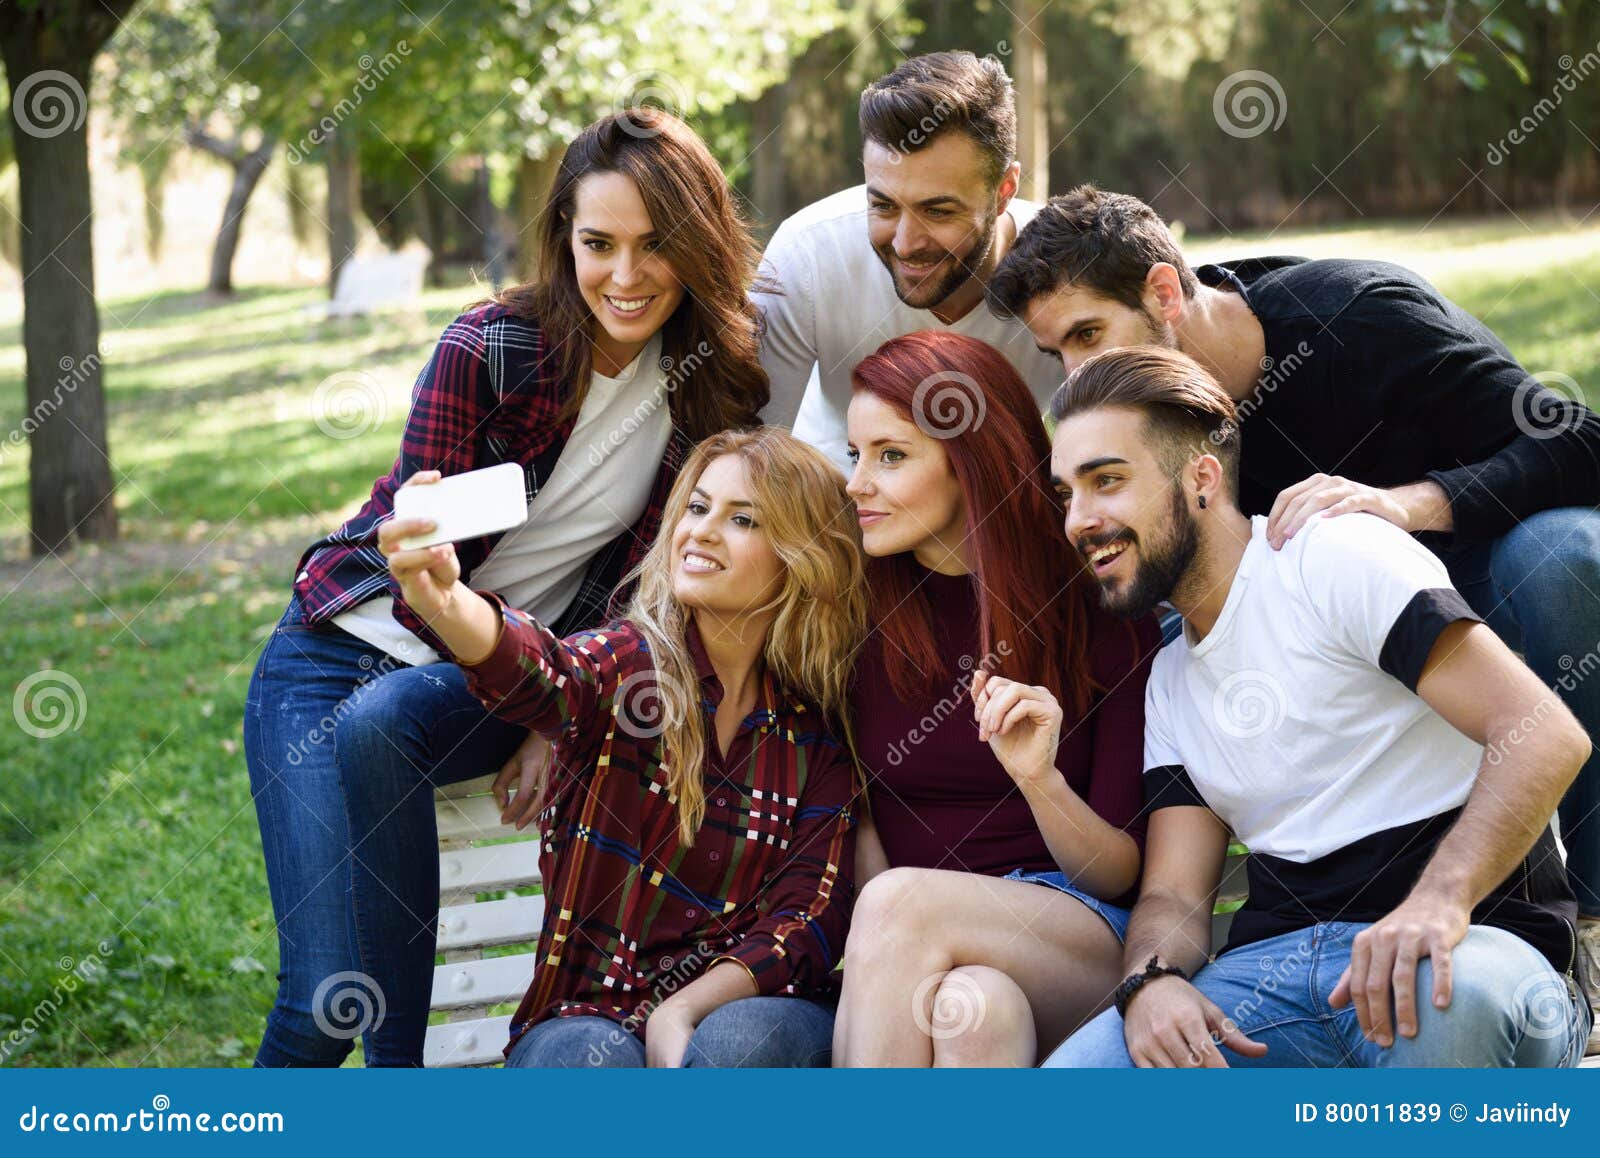 Group Of Friends Taking Selfie In Urban Background Stock Image Image 